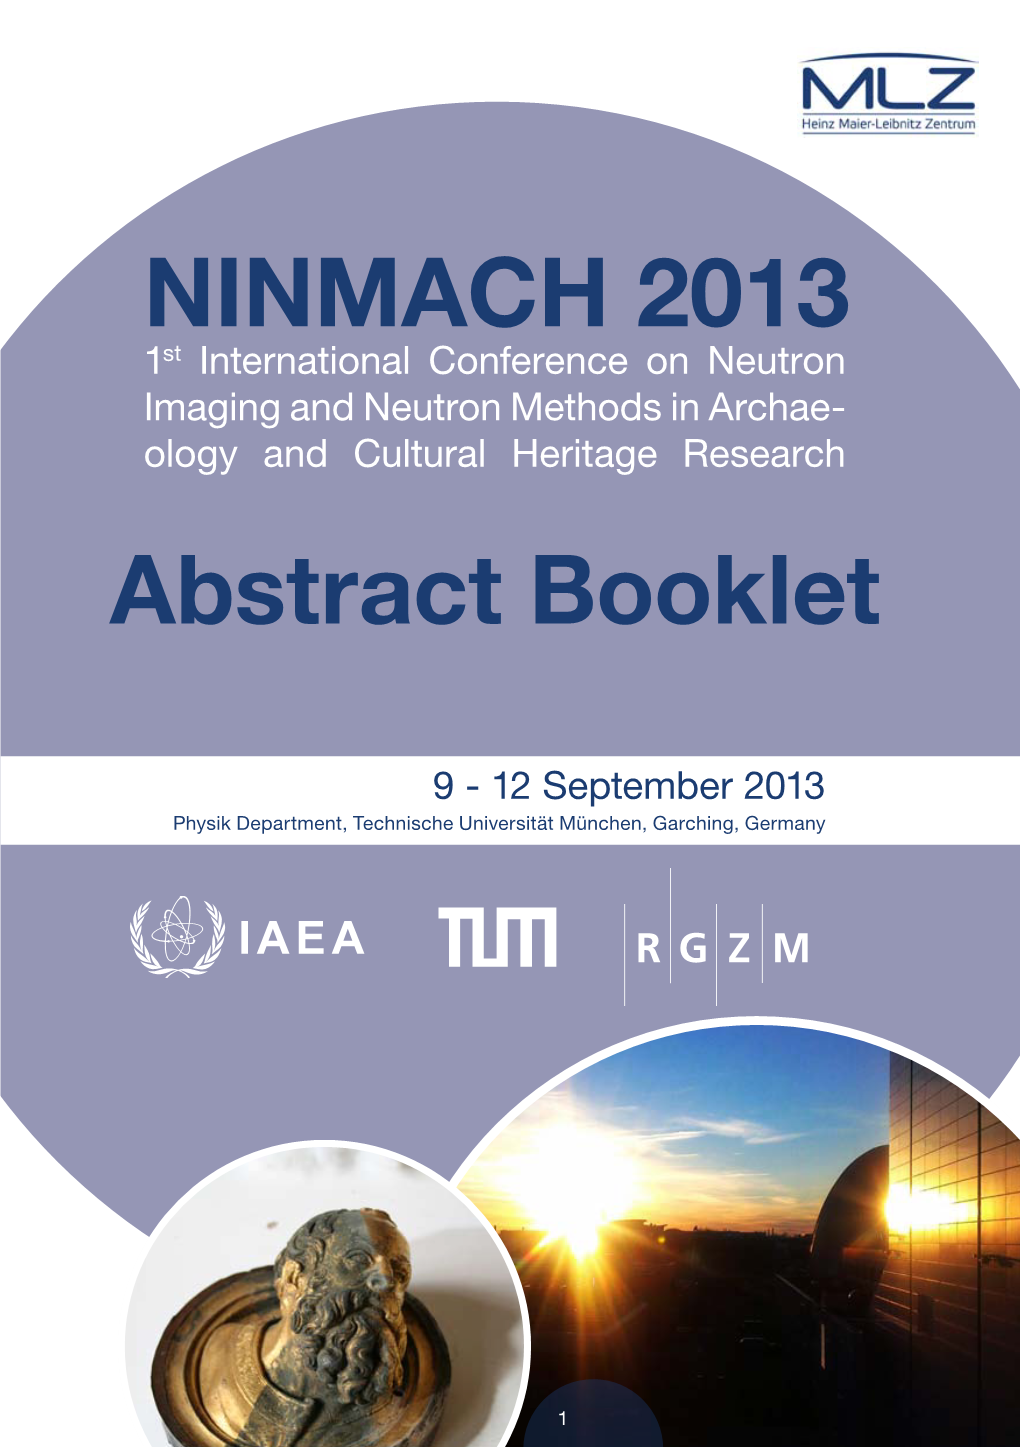 NINMACH 2013 Abstract Booklet